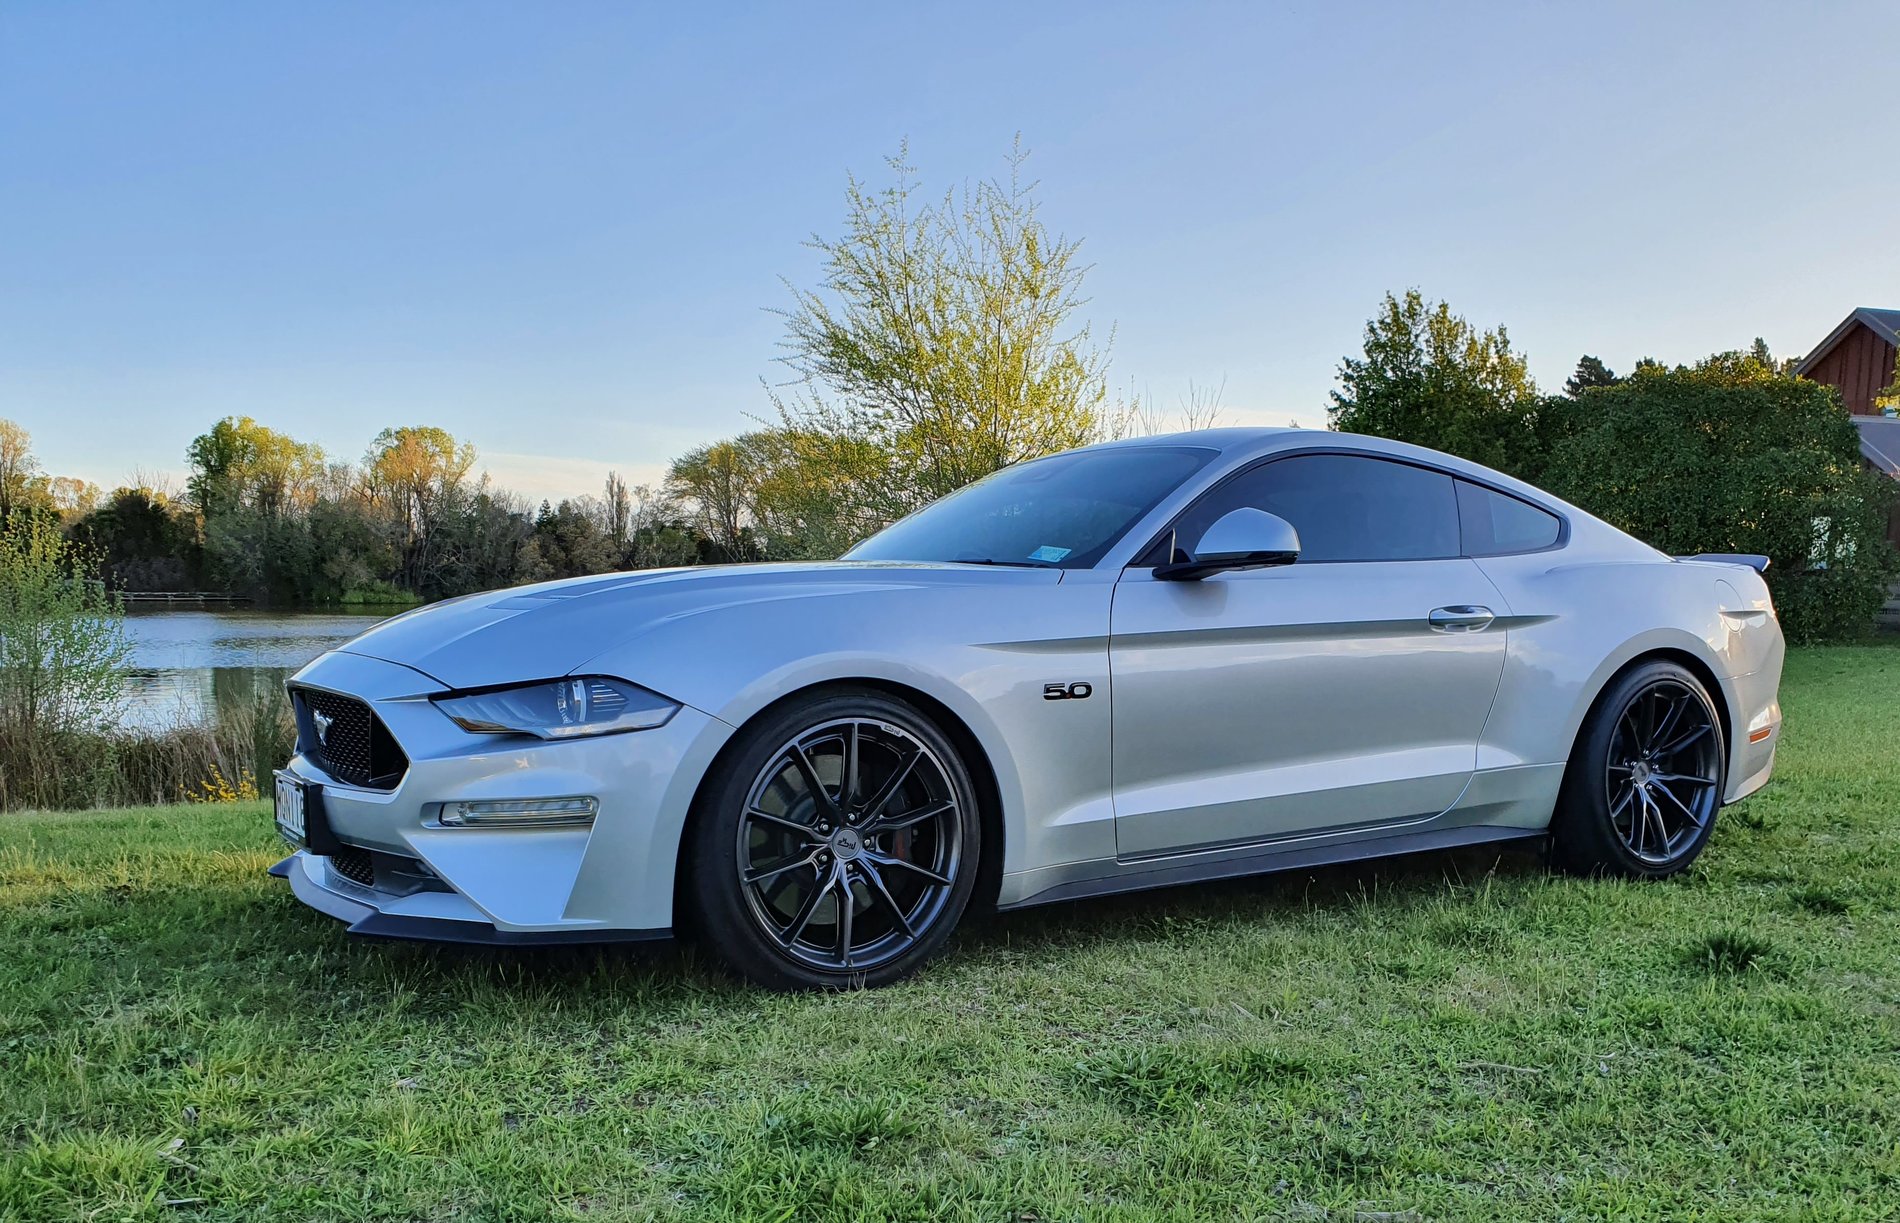 Ford Mustang GT S550 Silver Niche Rainer M239 | Wheel Front